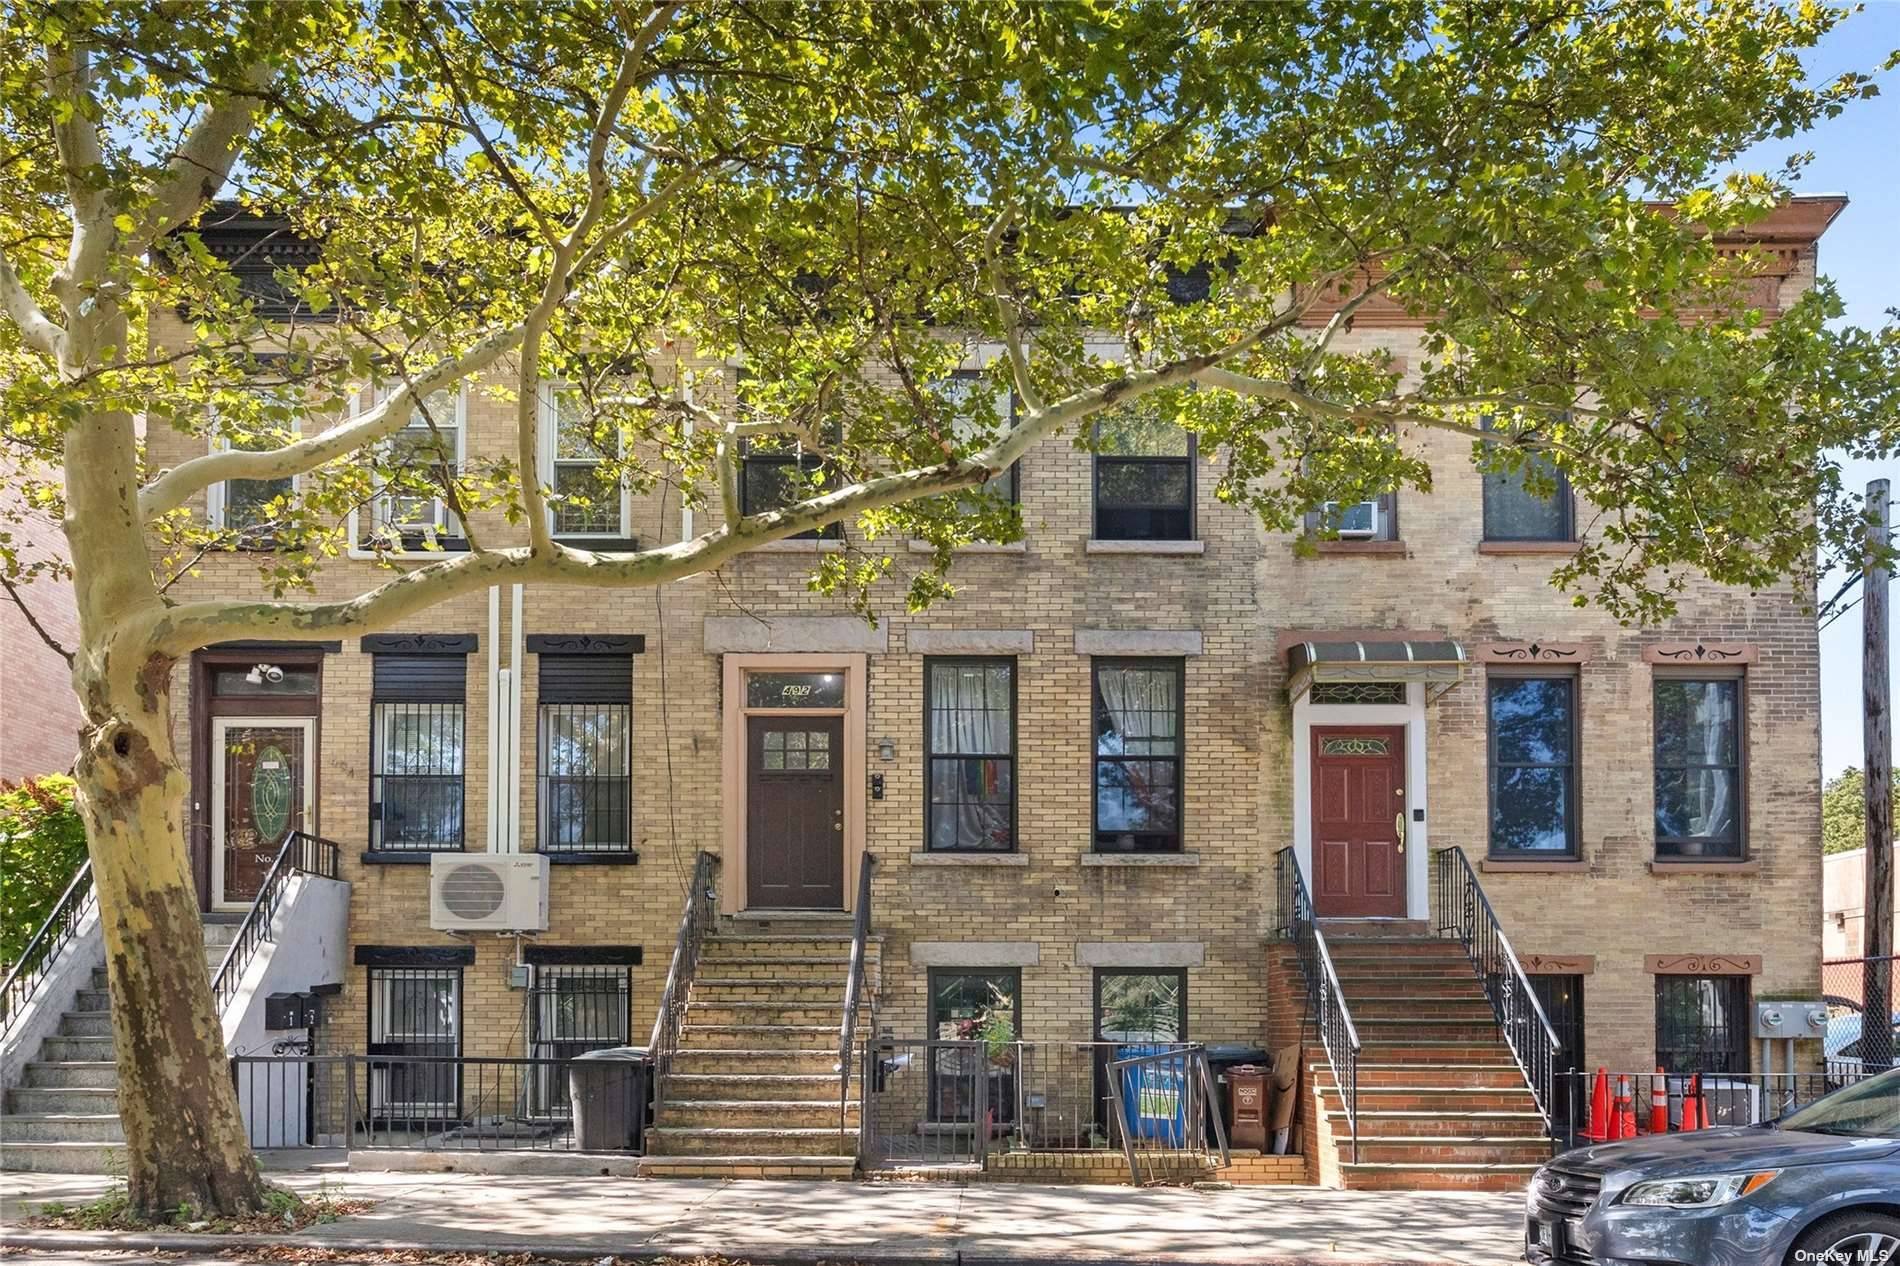 A charming 3 brick family home nestled in the most desirable neighborhood of Greenwood Heights, all units are newly renovated.